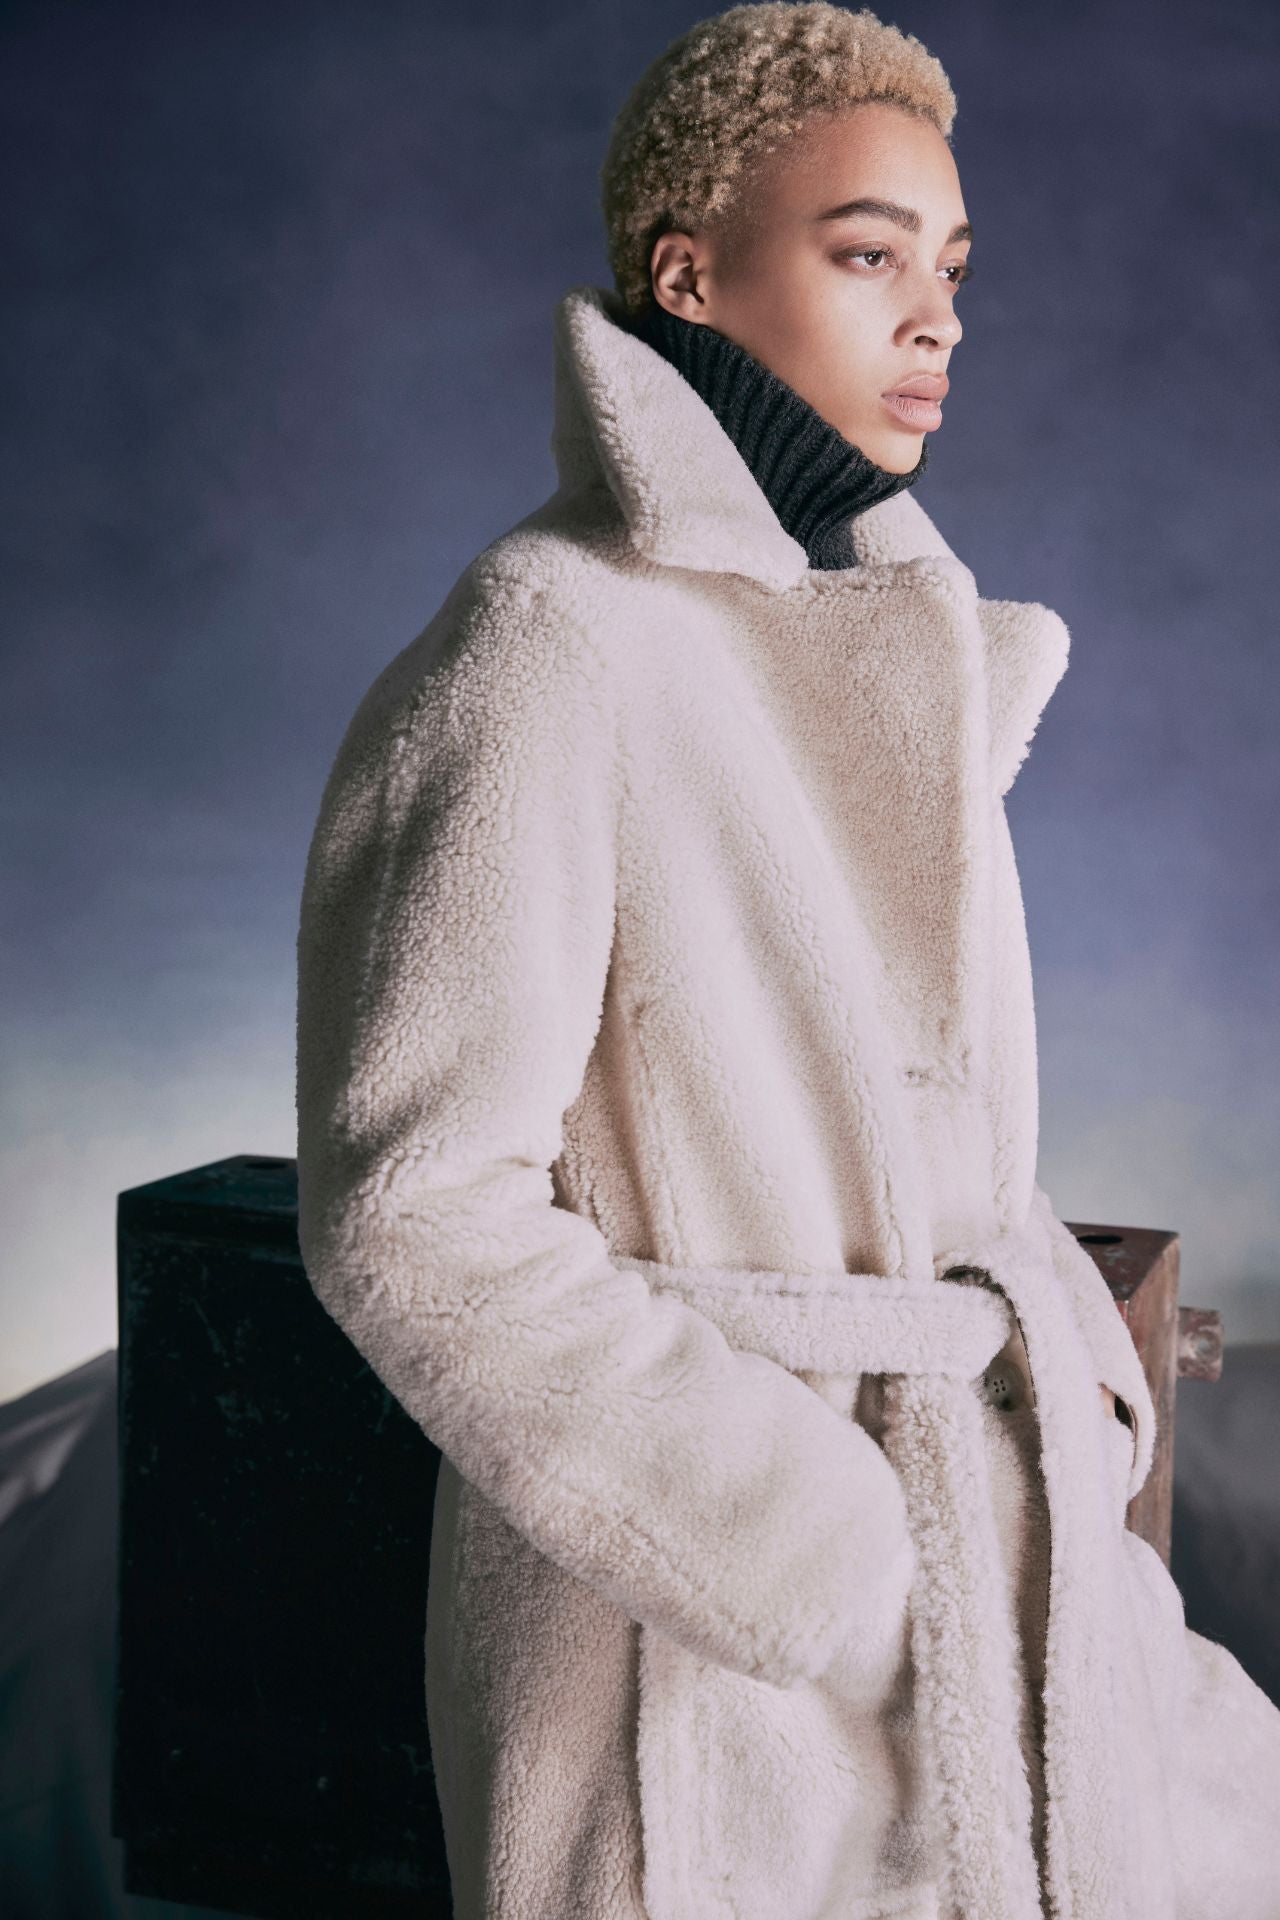 Vintage inspired reversible notch collar nappa coat Reverses to curly wool teddy Relaxed dropped shoulder 3 button closure Tie belt at waist Zip pockets on nappa side, reverses to patch pockets on teddy side